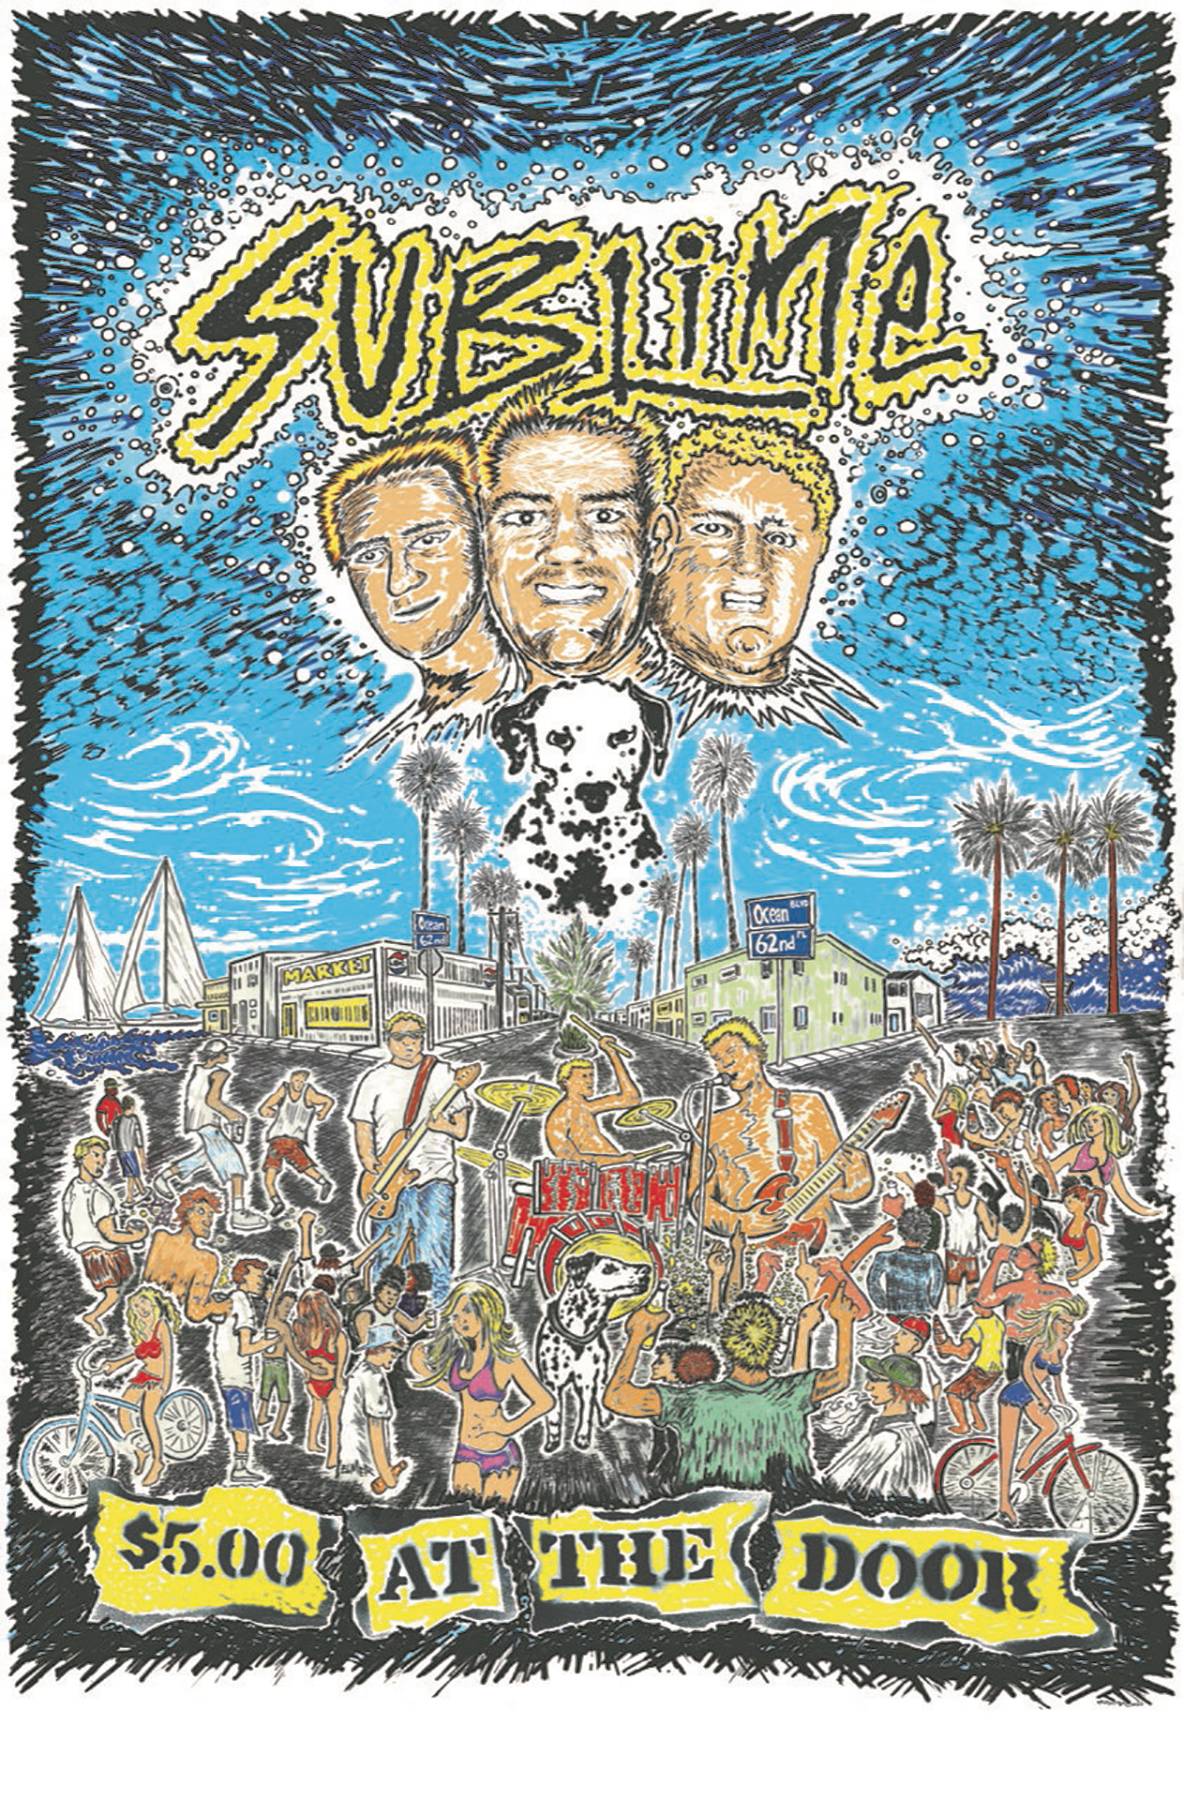 SUBLIME 5 DOLLARS AT THE DOOR TP